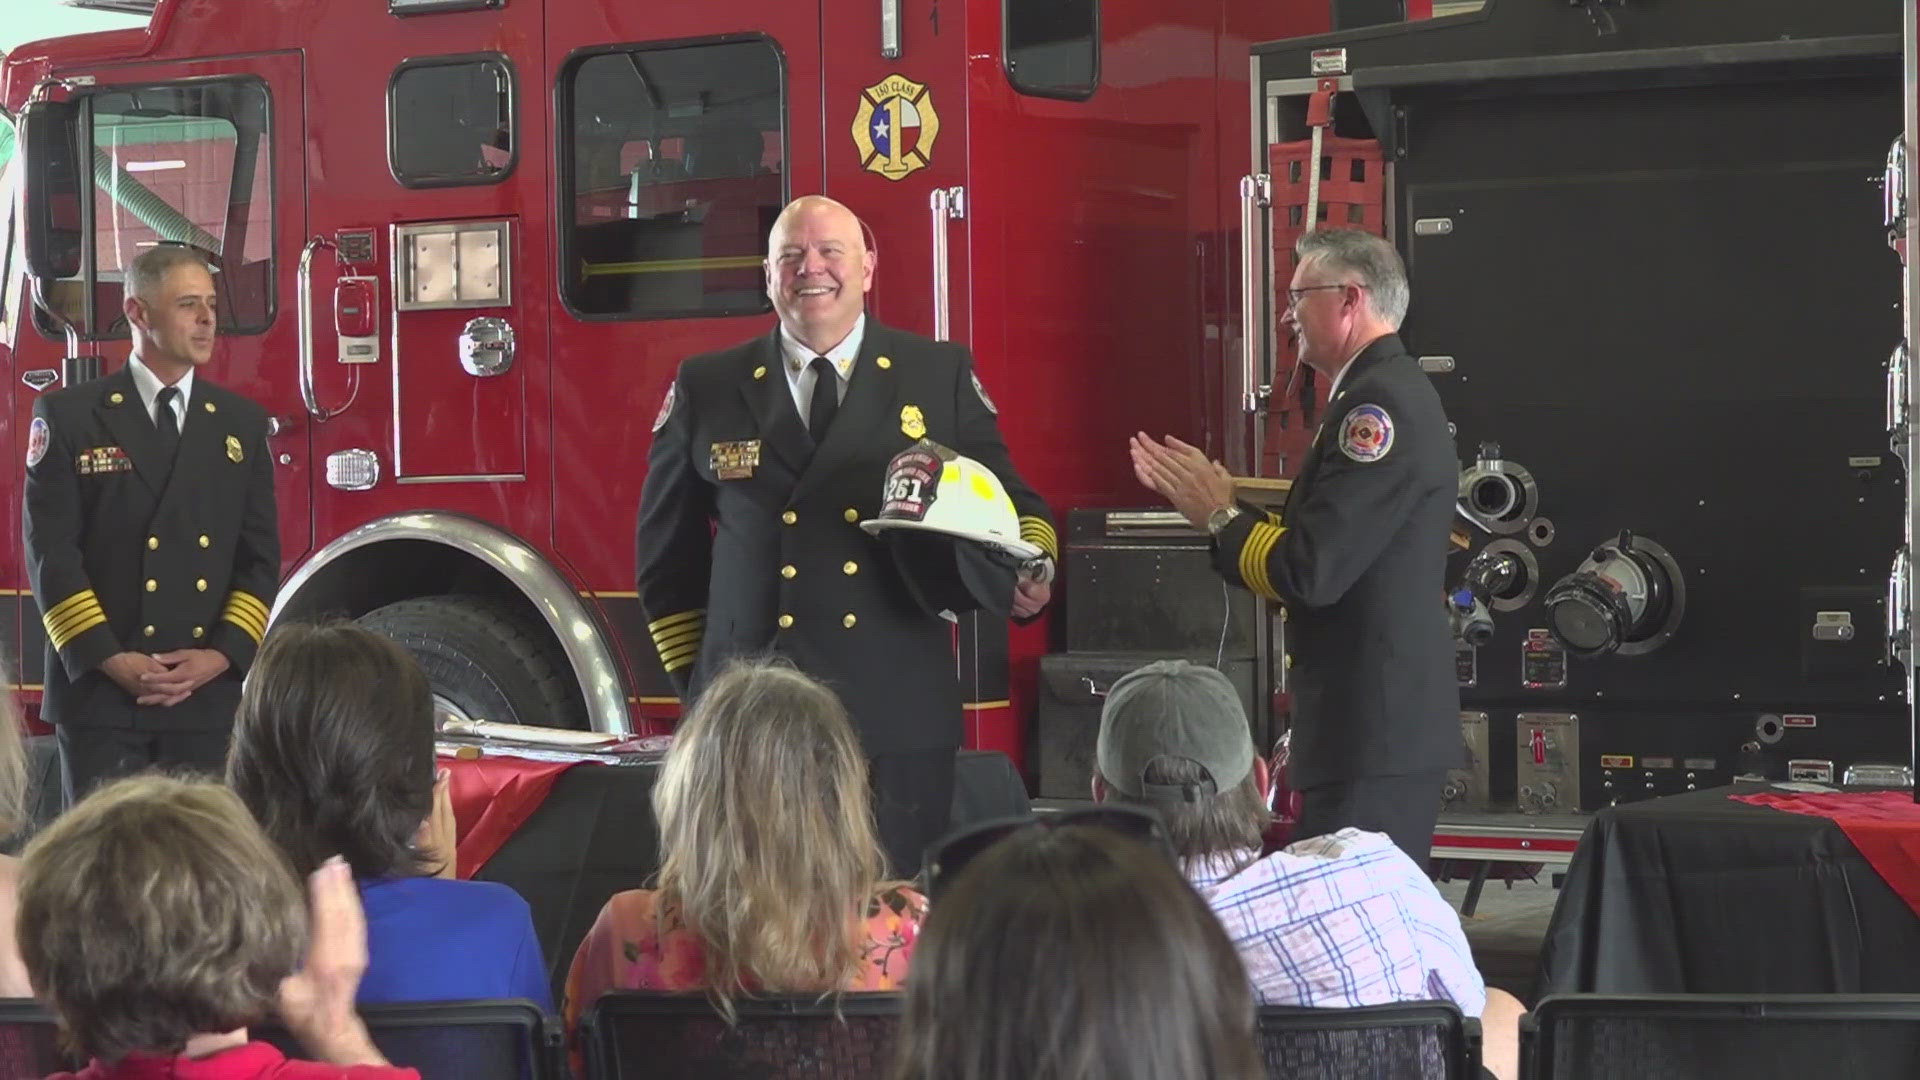 In his new role, Chief Blumenauer will oversee safety operations, including fire services, Animal Services, Health Department, and emergency services.